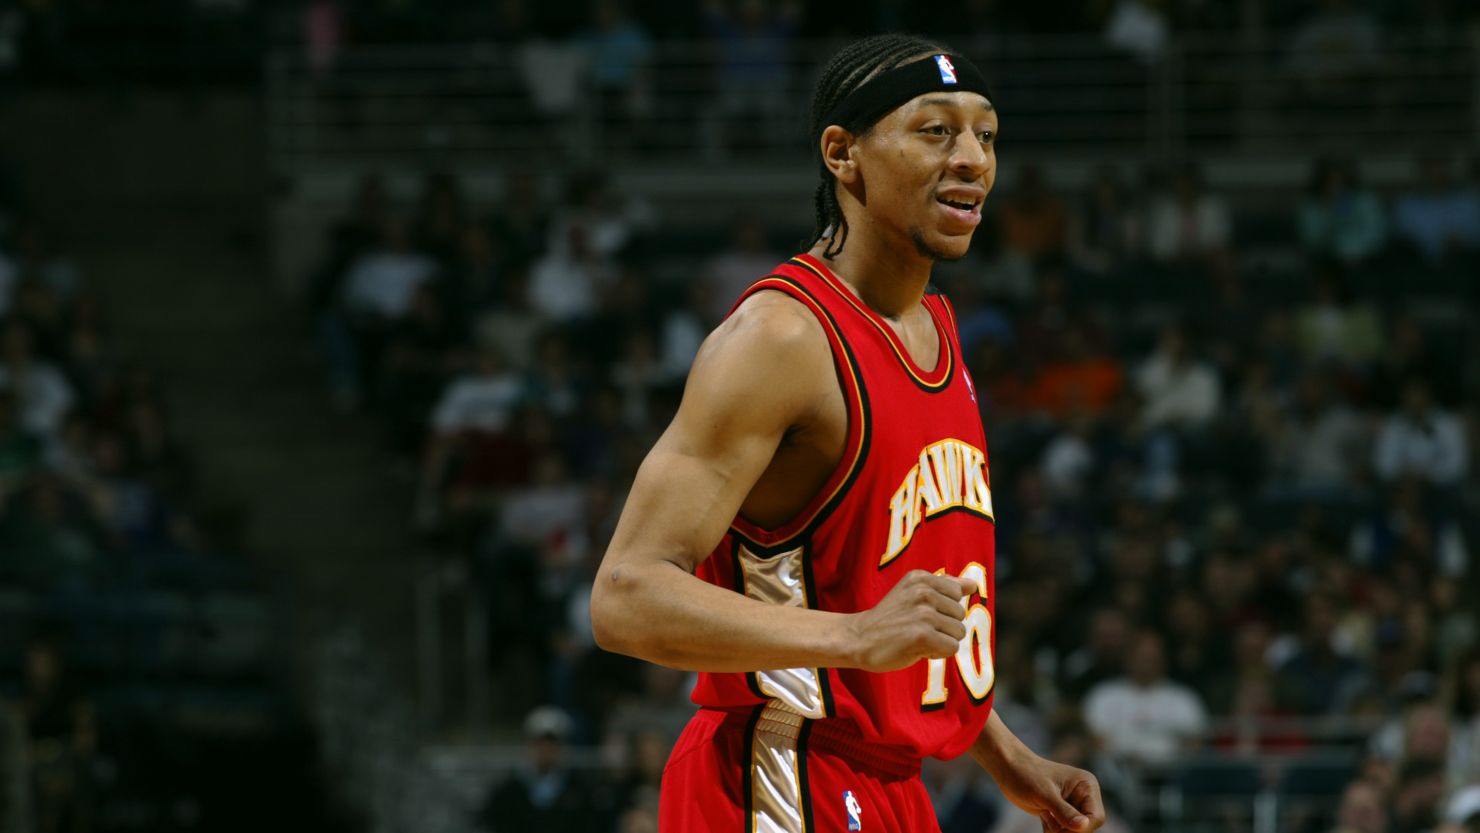 Anthony Grundy briefly for the Atlanta Hawks during the 2005-2006 season.